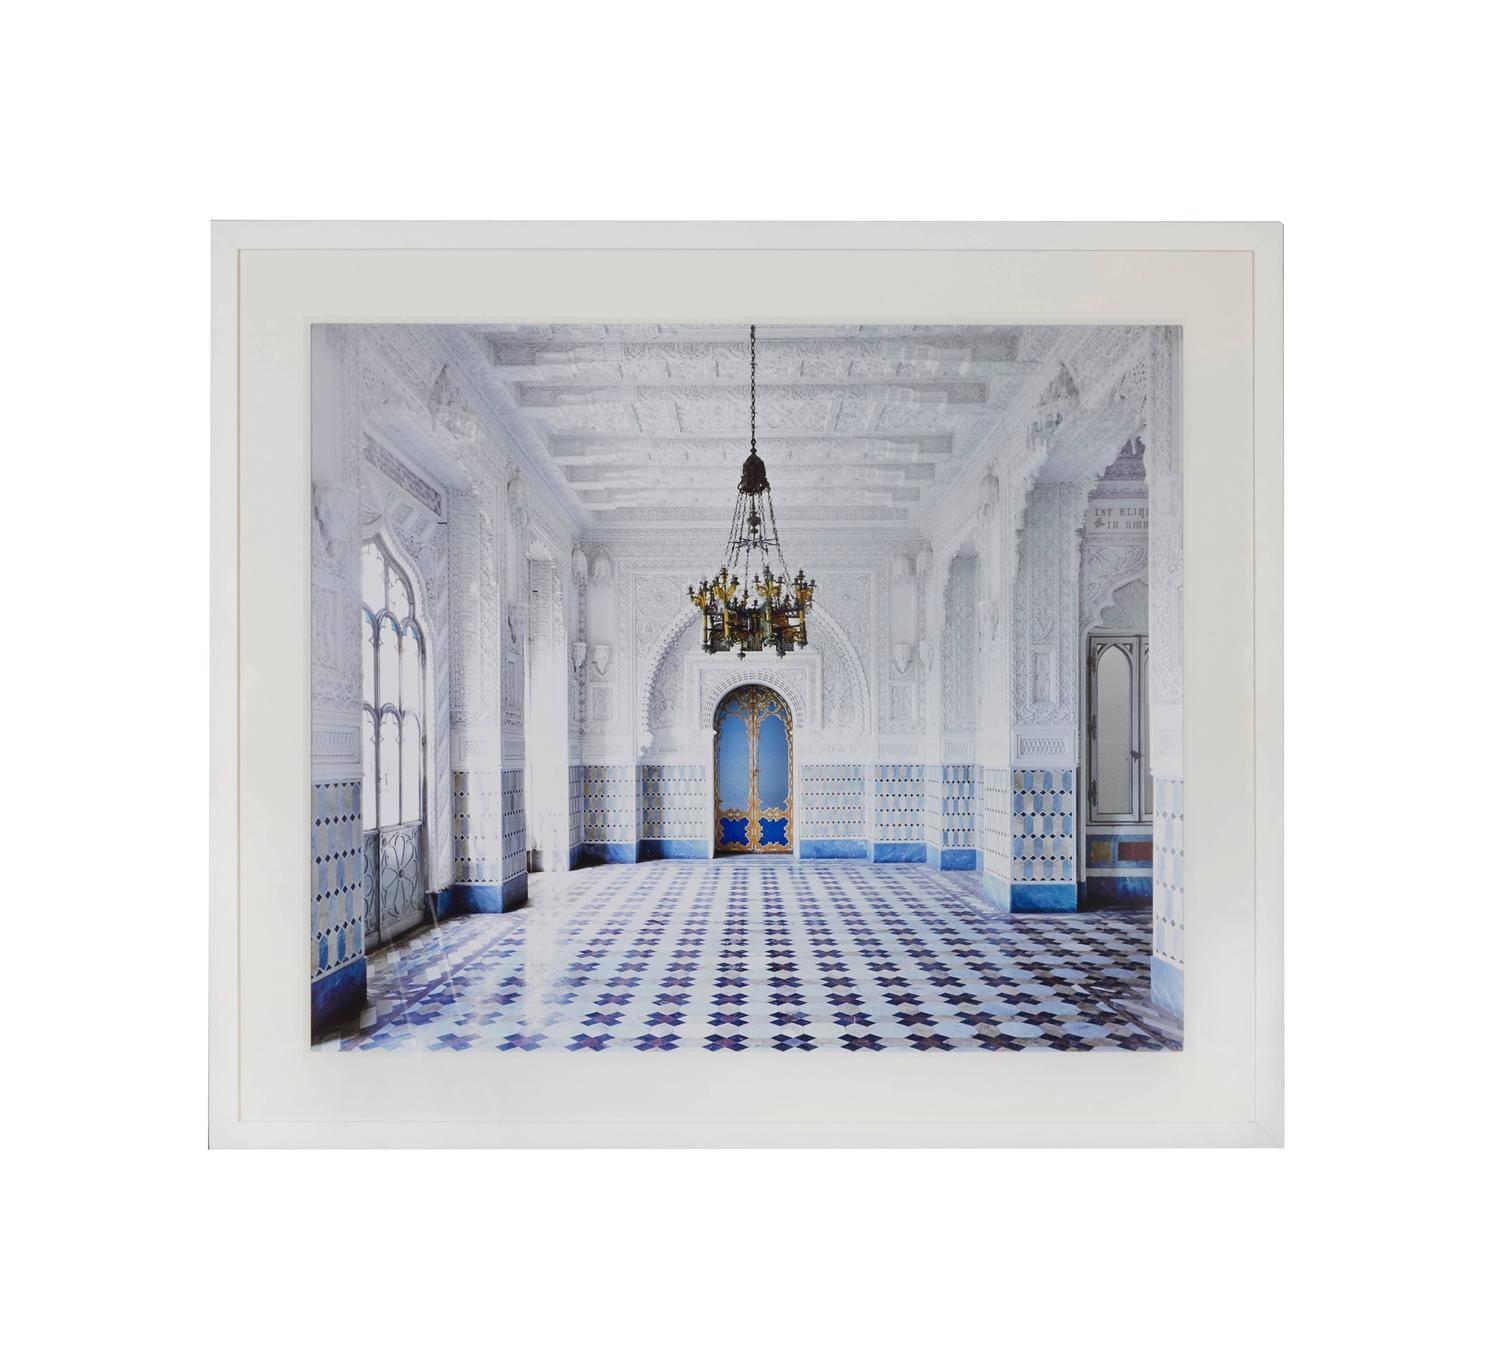 CASTELLO RACCONIGI 2007
Chromogenic print
Edition of 5
Signed, dated, and numbered on verso label   
Mounted on aluminum
Framing options available 

39.5 x 47.5 inches edition of 5  
47.5 x 59 inches edition of 5  
71 x 88.5 inches edition of 5  